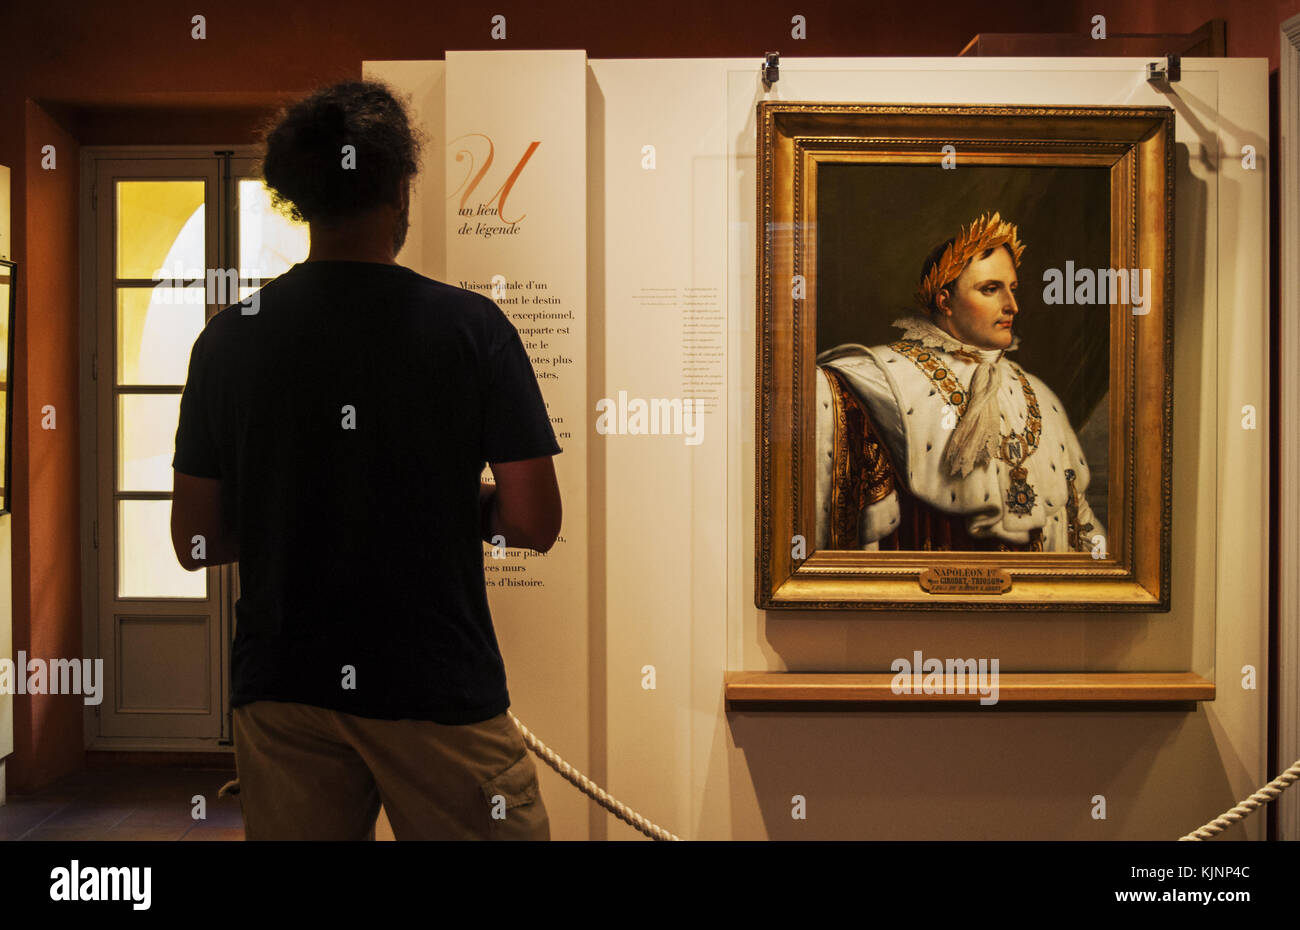 Corsica: a man looking at the portrait of Napoleon by the French painter Anne-Louis Girodet de Roussy-Trioson in the Maison Bonaparte, national museum Stock Photo